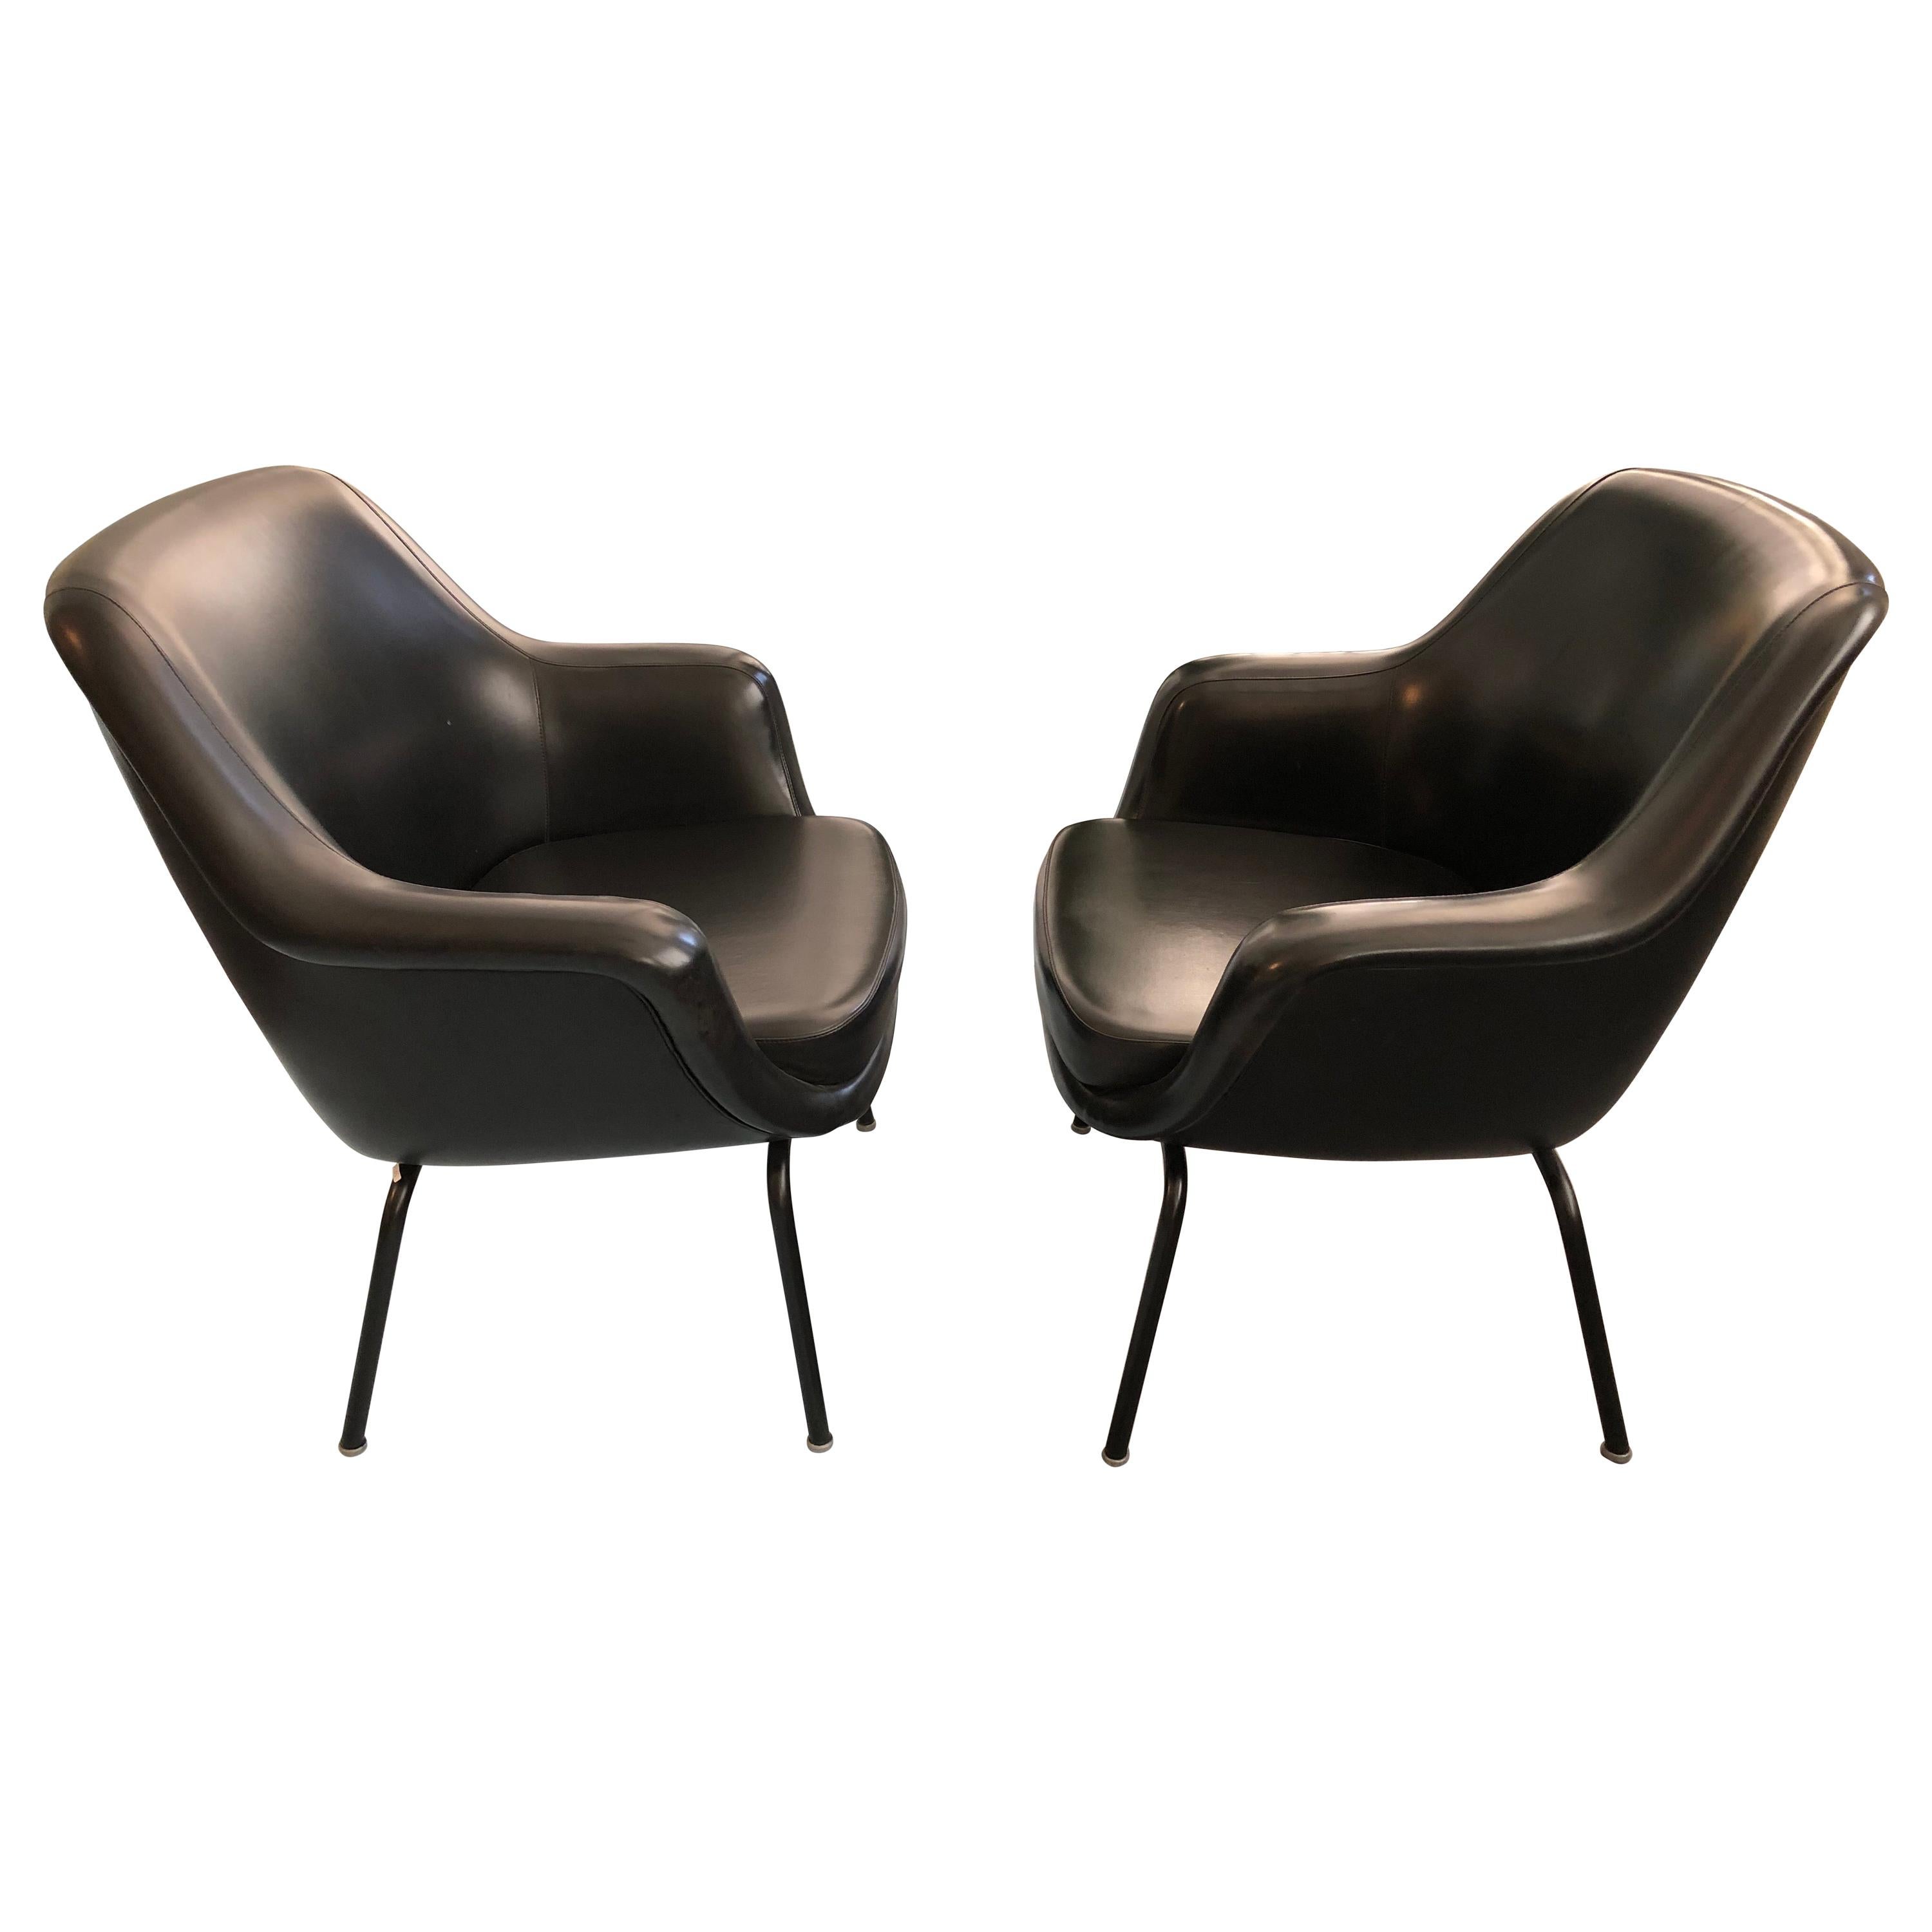 Pair of Olli Mannermaa Armchairs by Cassina, Italy, 1960s For Sale